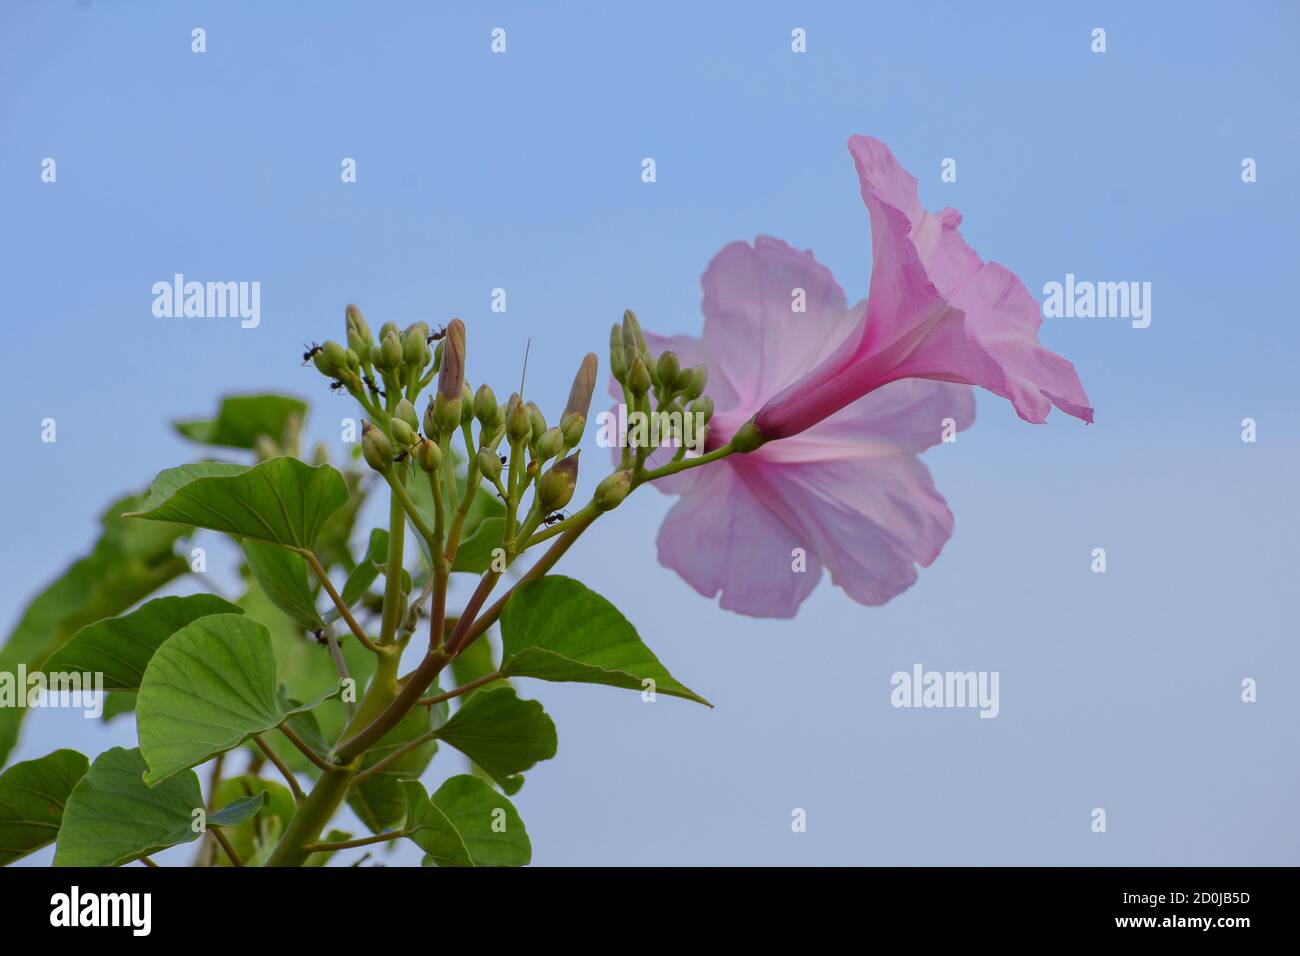 Beautiful fresh pink morning glory (ipomoea carnea) plant with flower blossoms and buds in blue sky background, medicinal plant, poisonous toxic Stock Photo